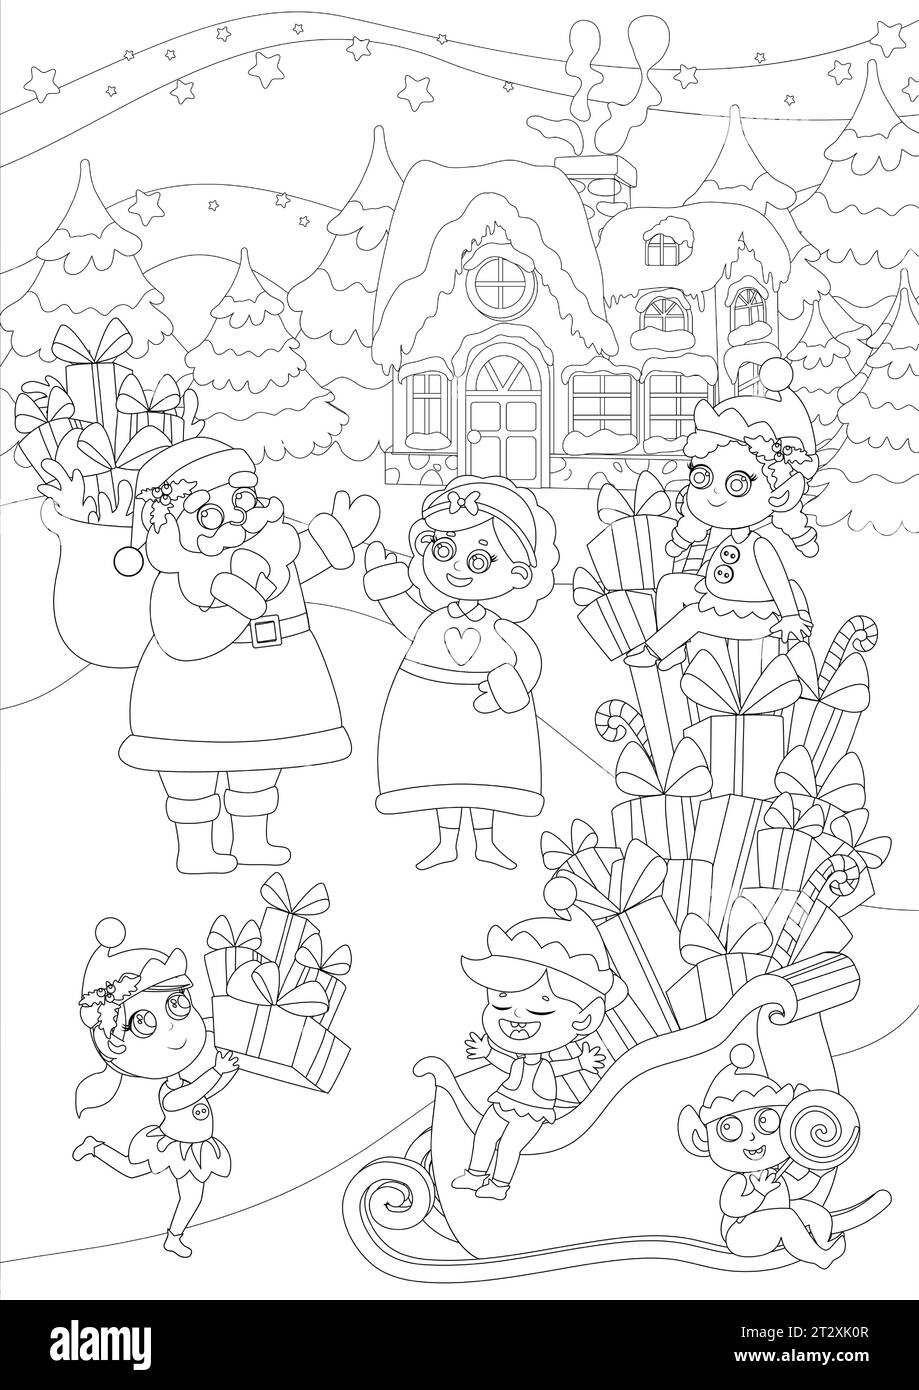 Coloring page. The scene near the house of Santa Claus. Under the evening sky stands Santa and Mrs. Santa, there are huge sleighs with presents. Stock Vector